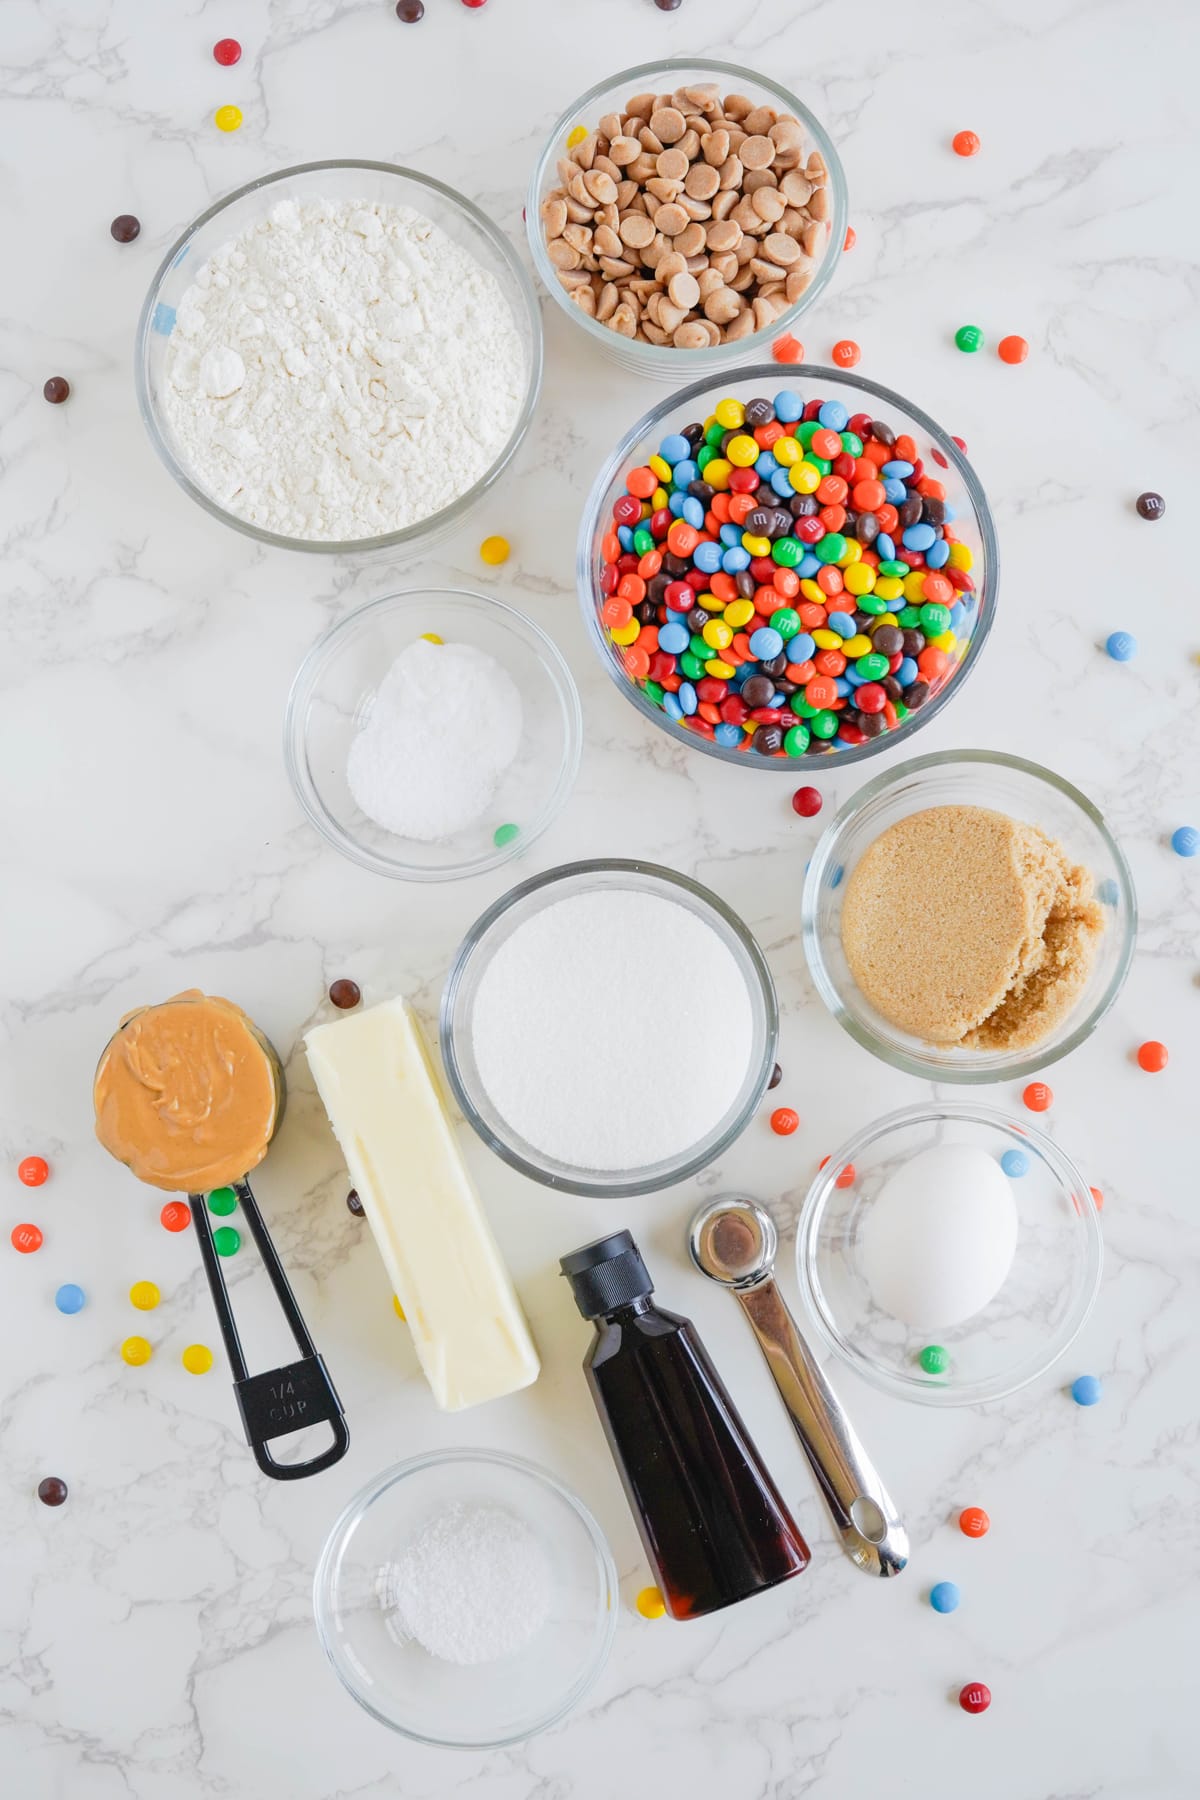 Ingredients to make peanut butter M&M cookies.